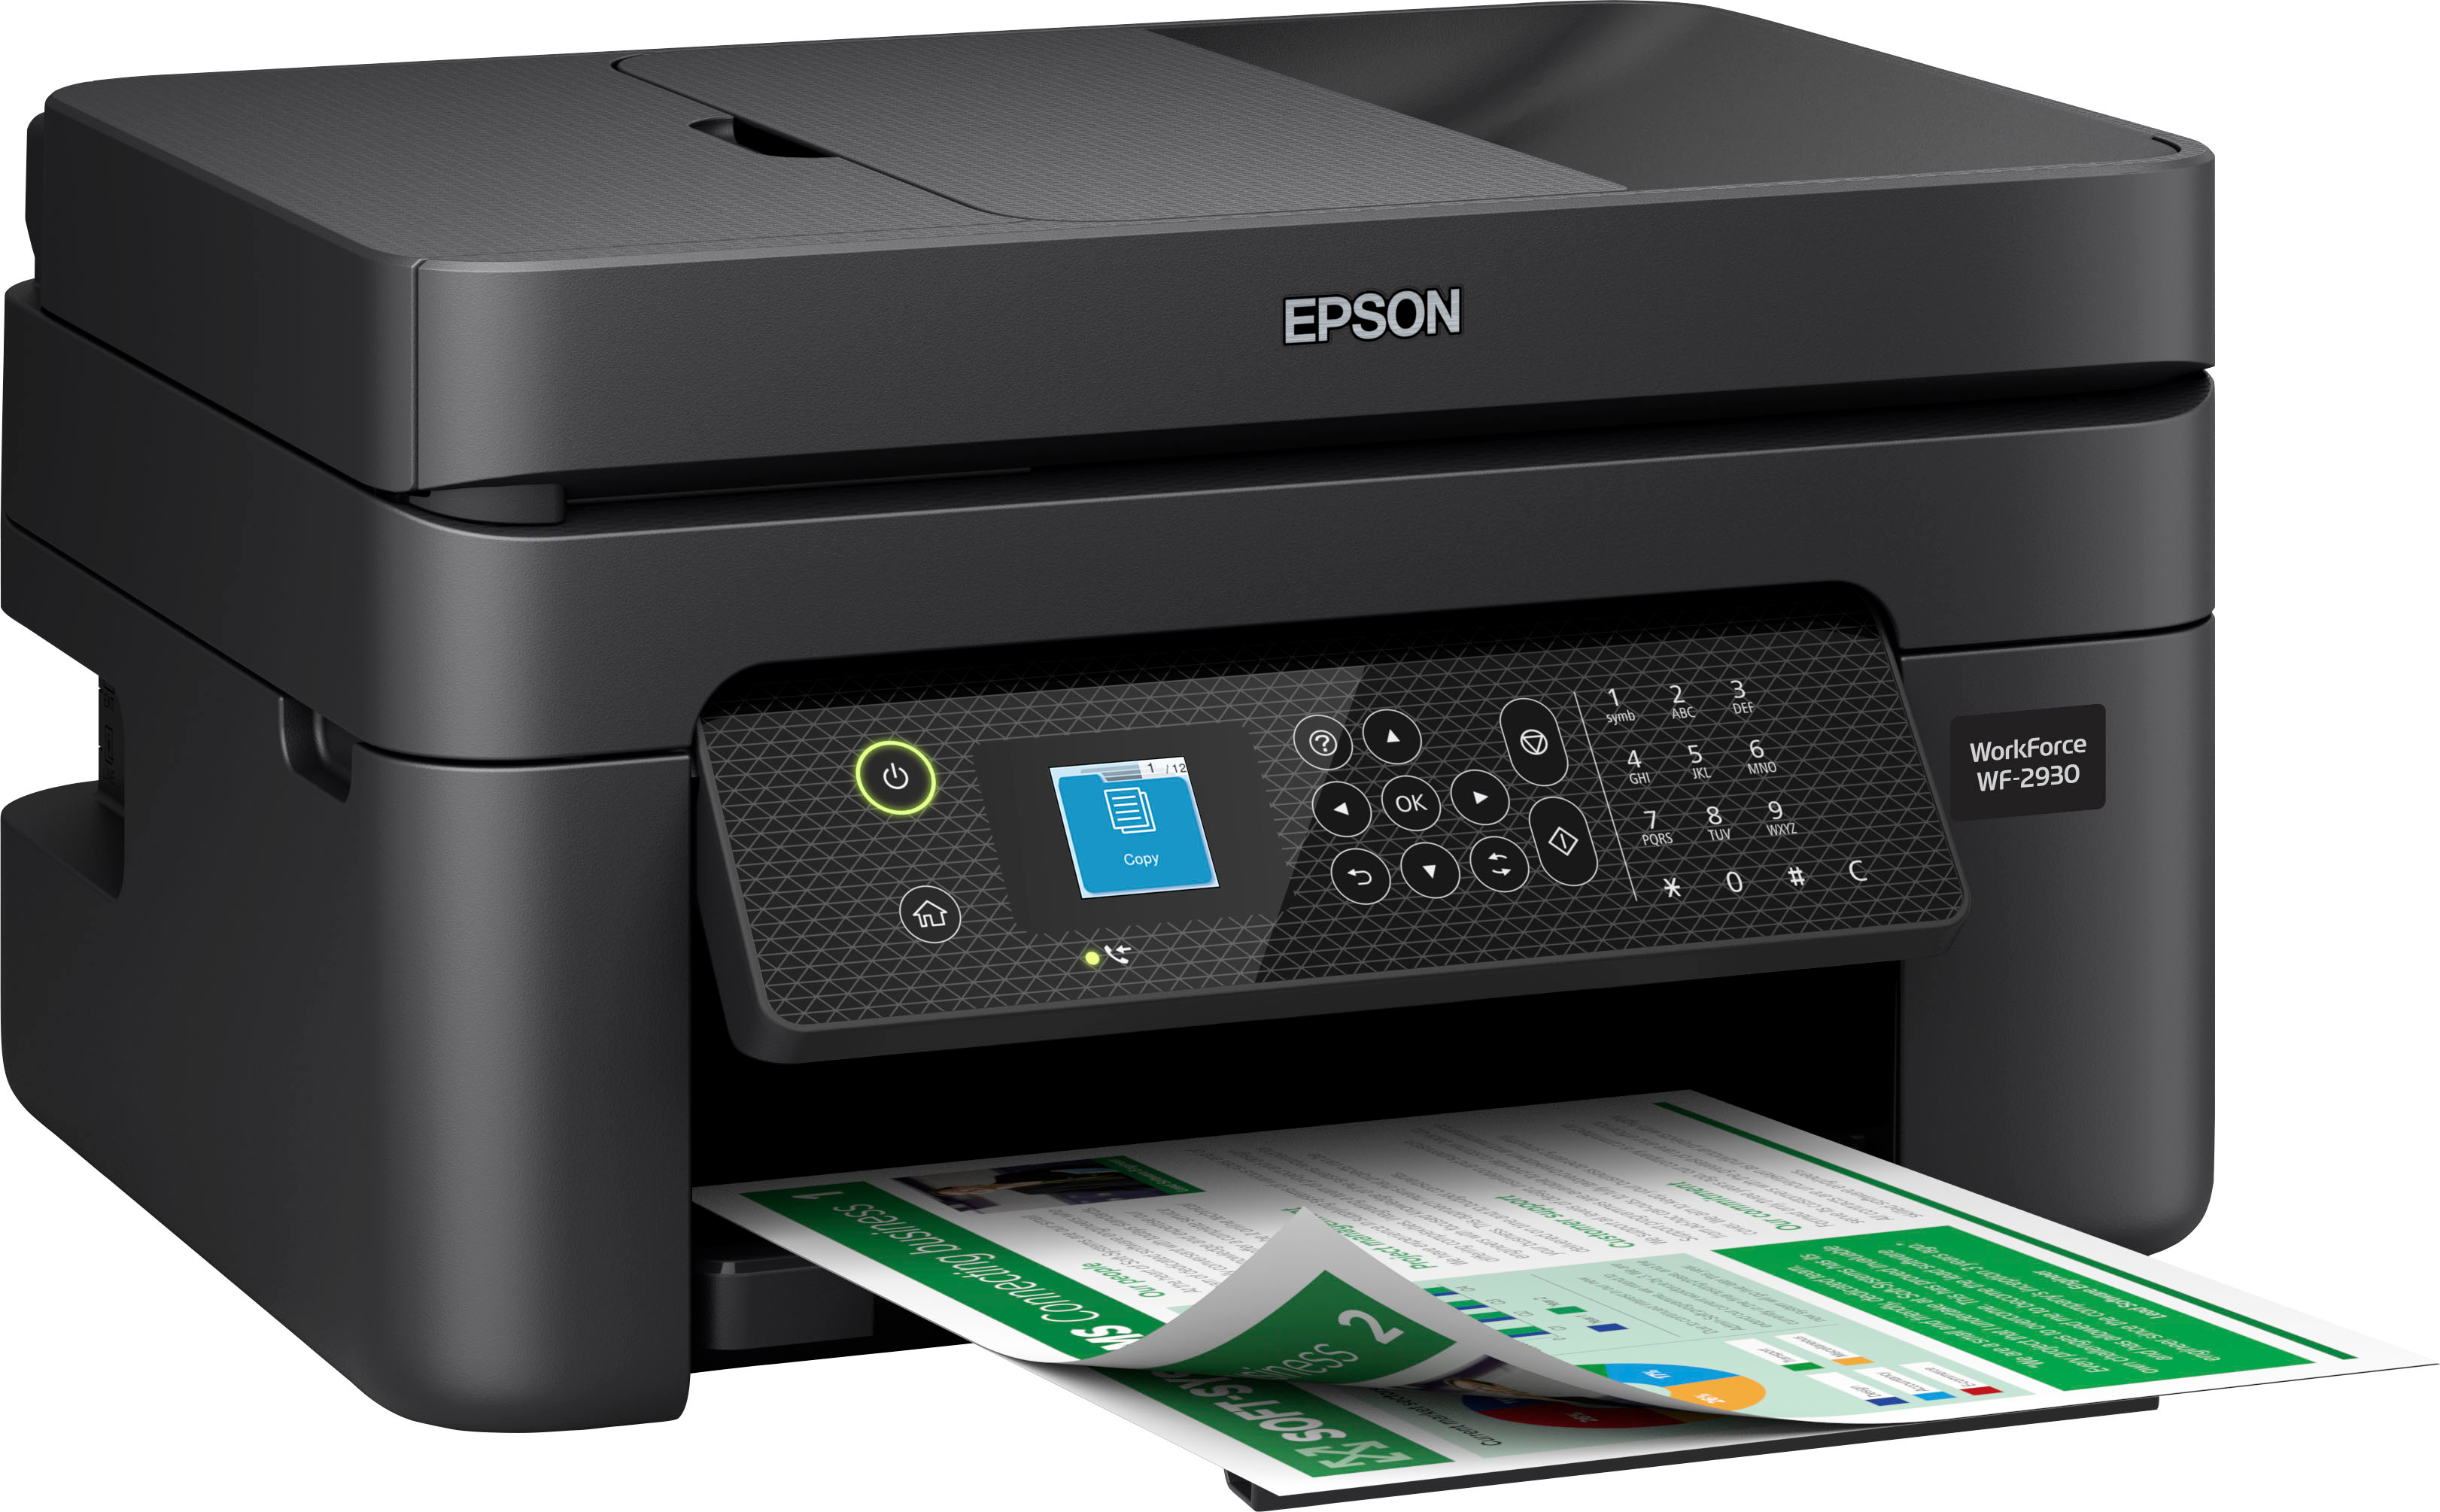 Angle View: Epson WorkForce WF-2930 Wireless All-in-One Printer with Scan, Copy, Fax, Auto Document Feeder, Automatic 2-Sided Printing and 1.4" Color Display